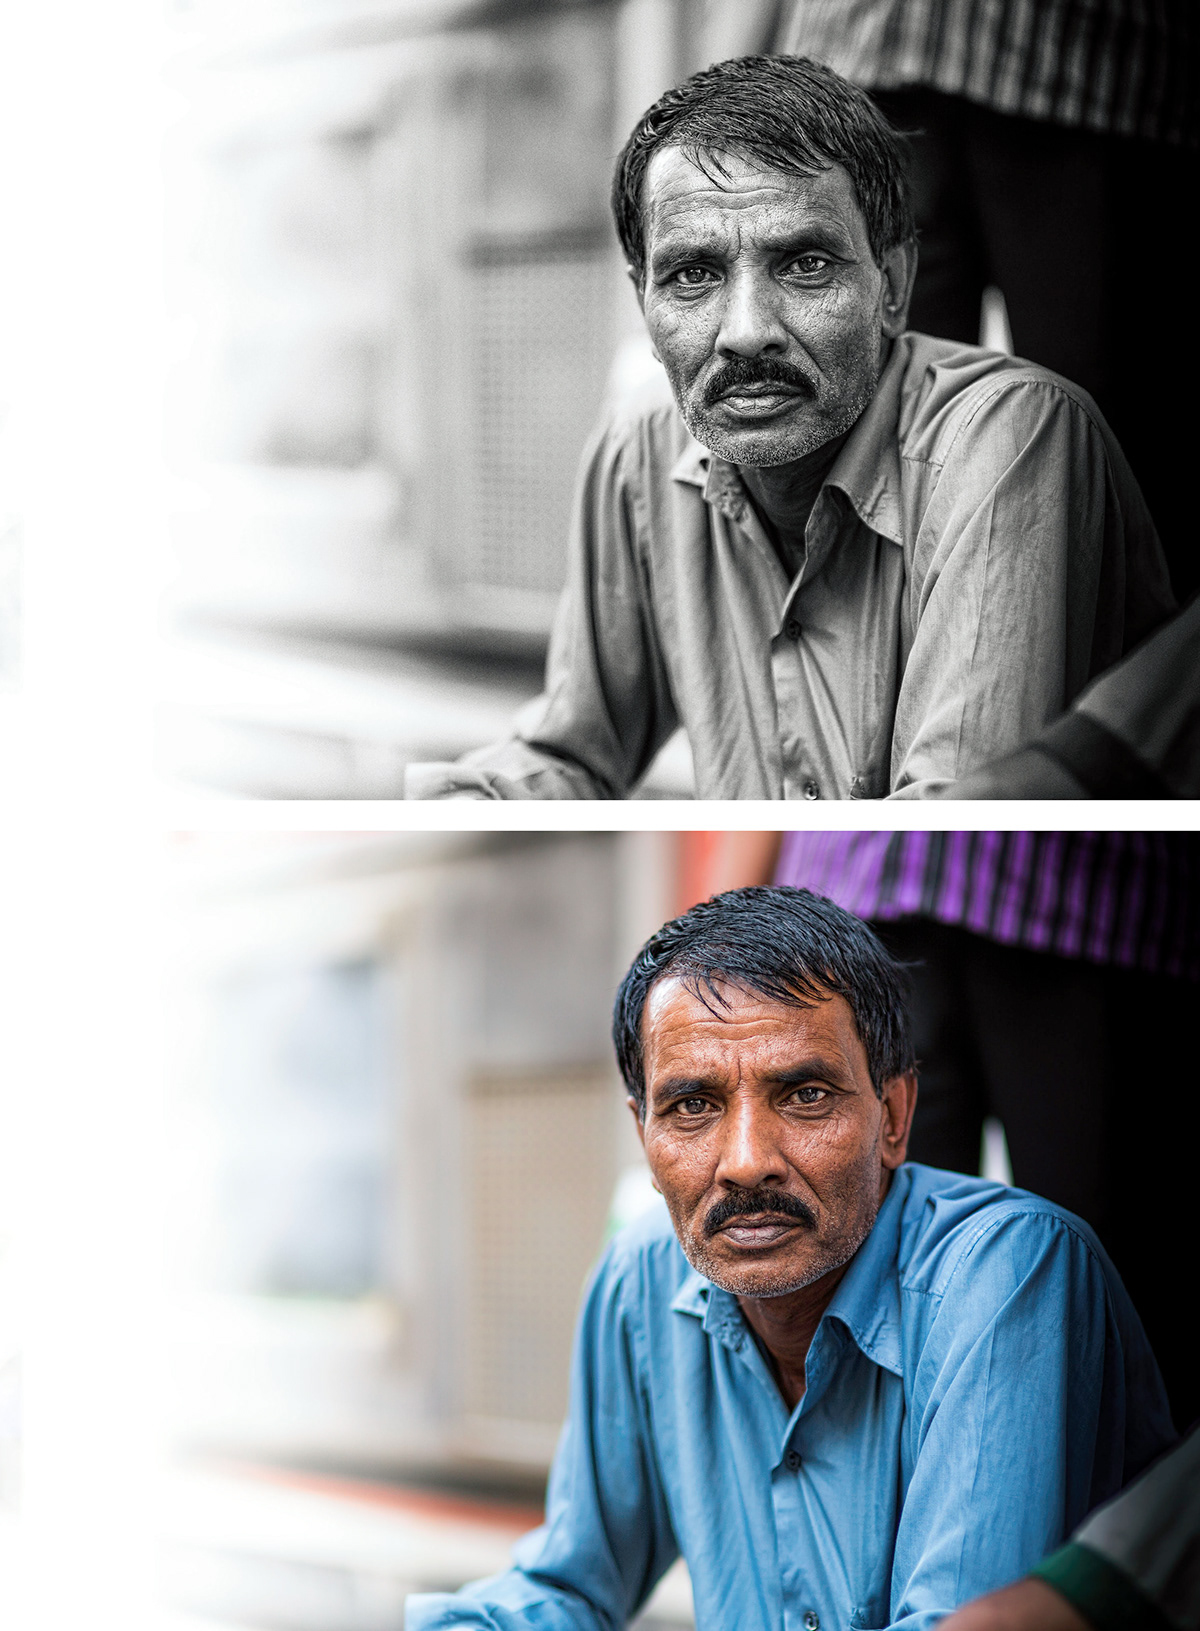 portraits people faces strangers head shoots Street Labourer street workers Wrinkles soul black and white b&w colour weathered post processing